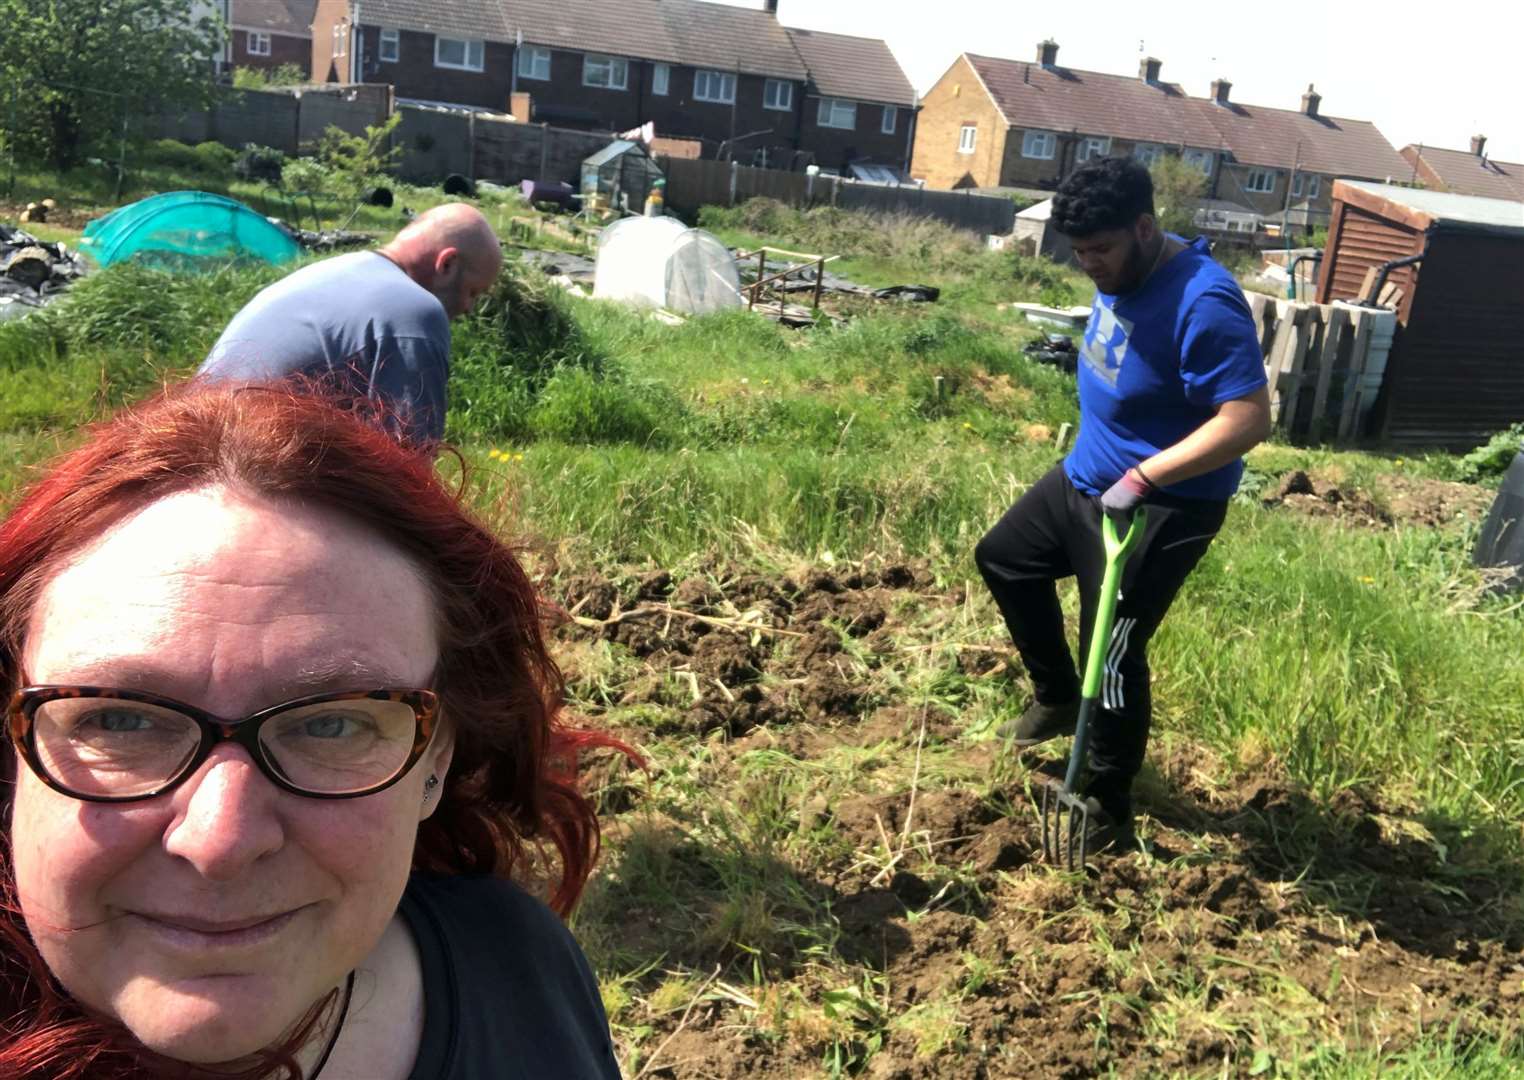 Claire Pearce has an allotment on Kirby Road in Dartford. Photo: Claire Pearce